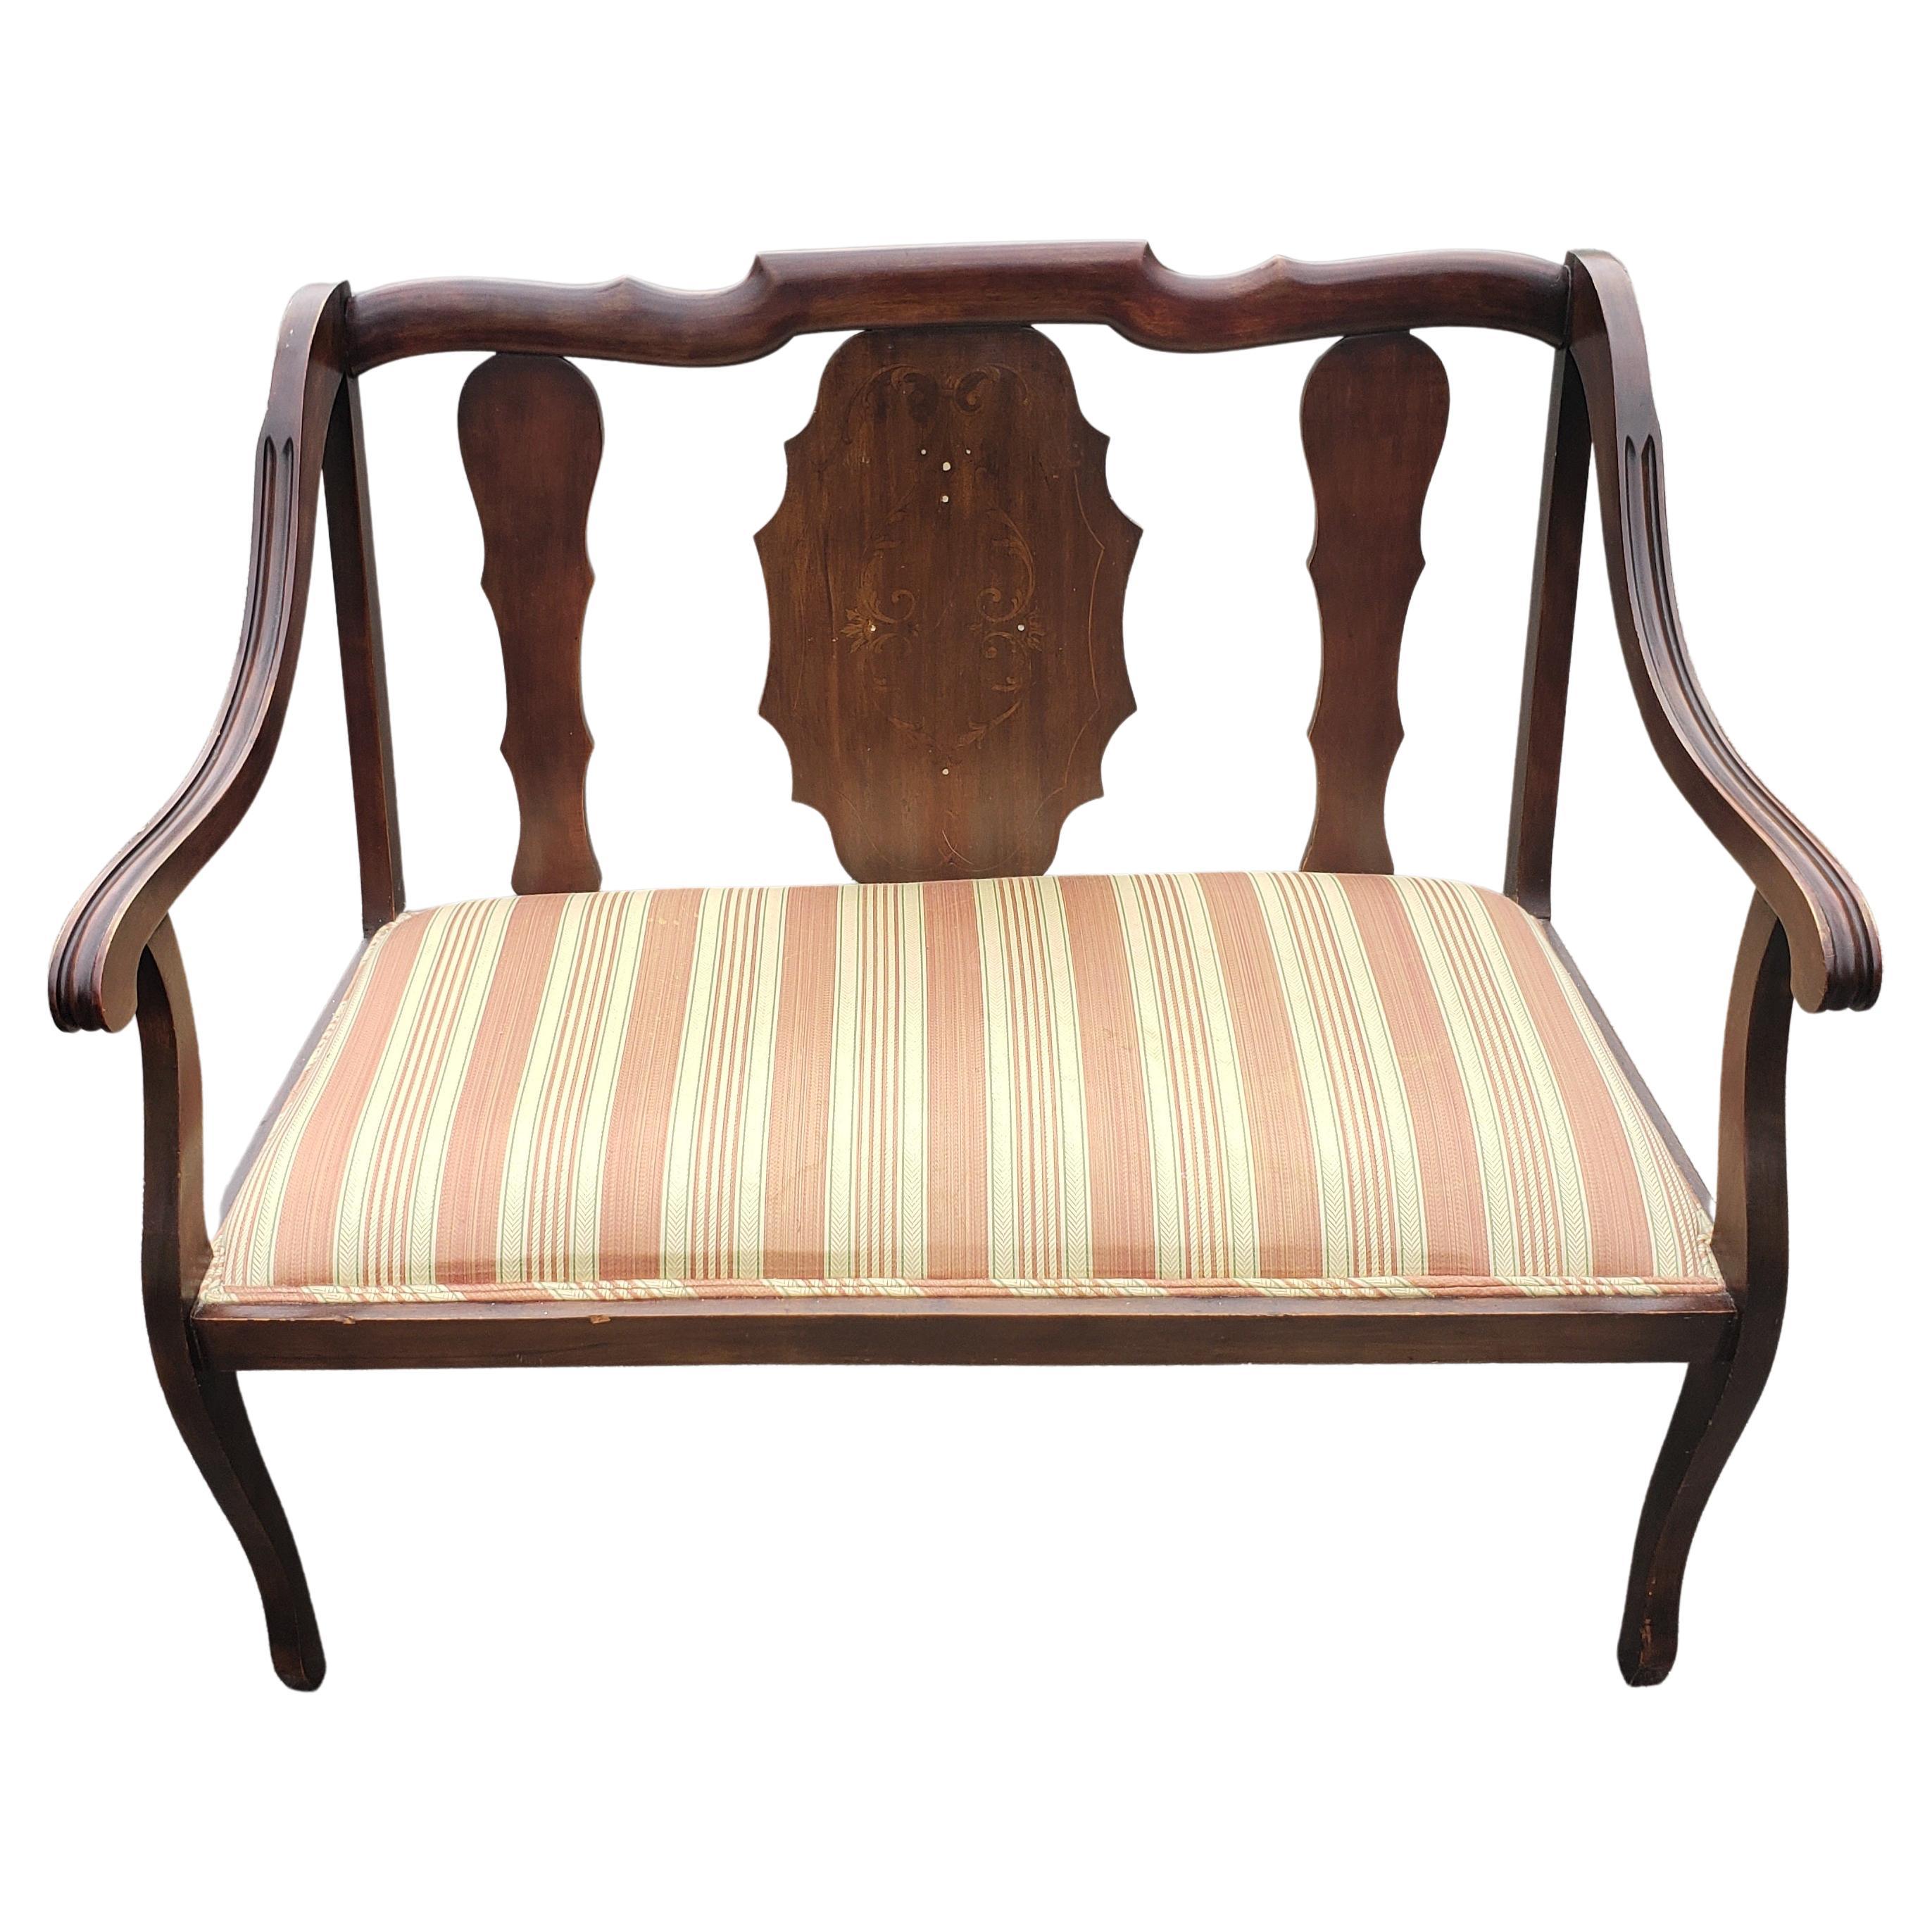 Classical Style Mahogany And Stripe Upholstered Loveseat and bench in good vintage condition.
Measures 41.5